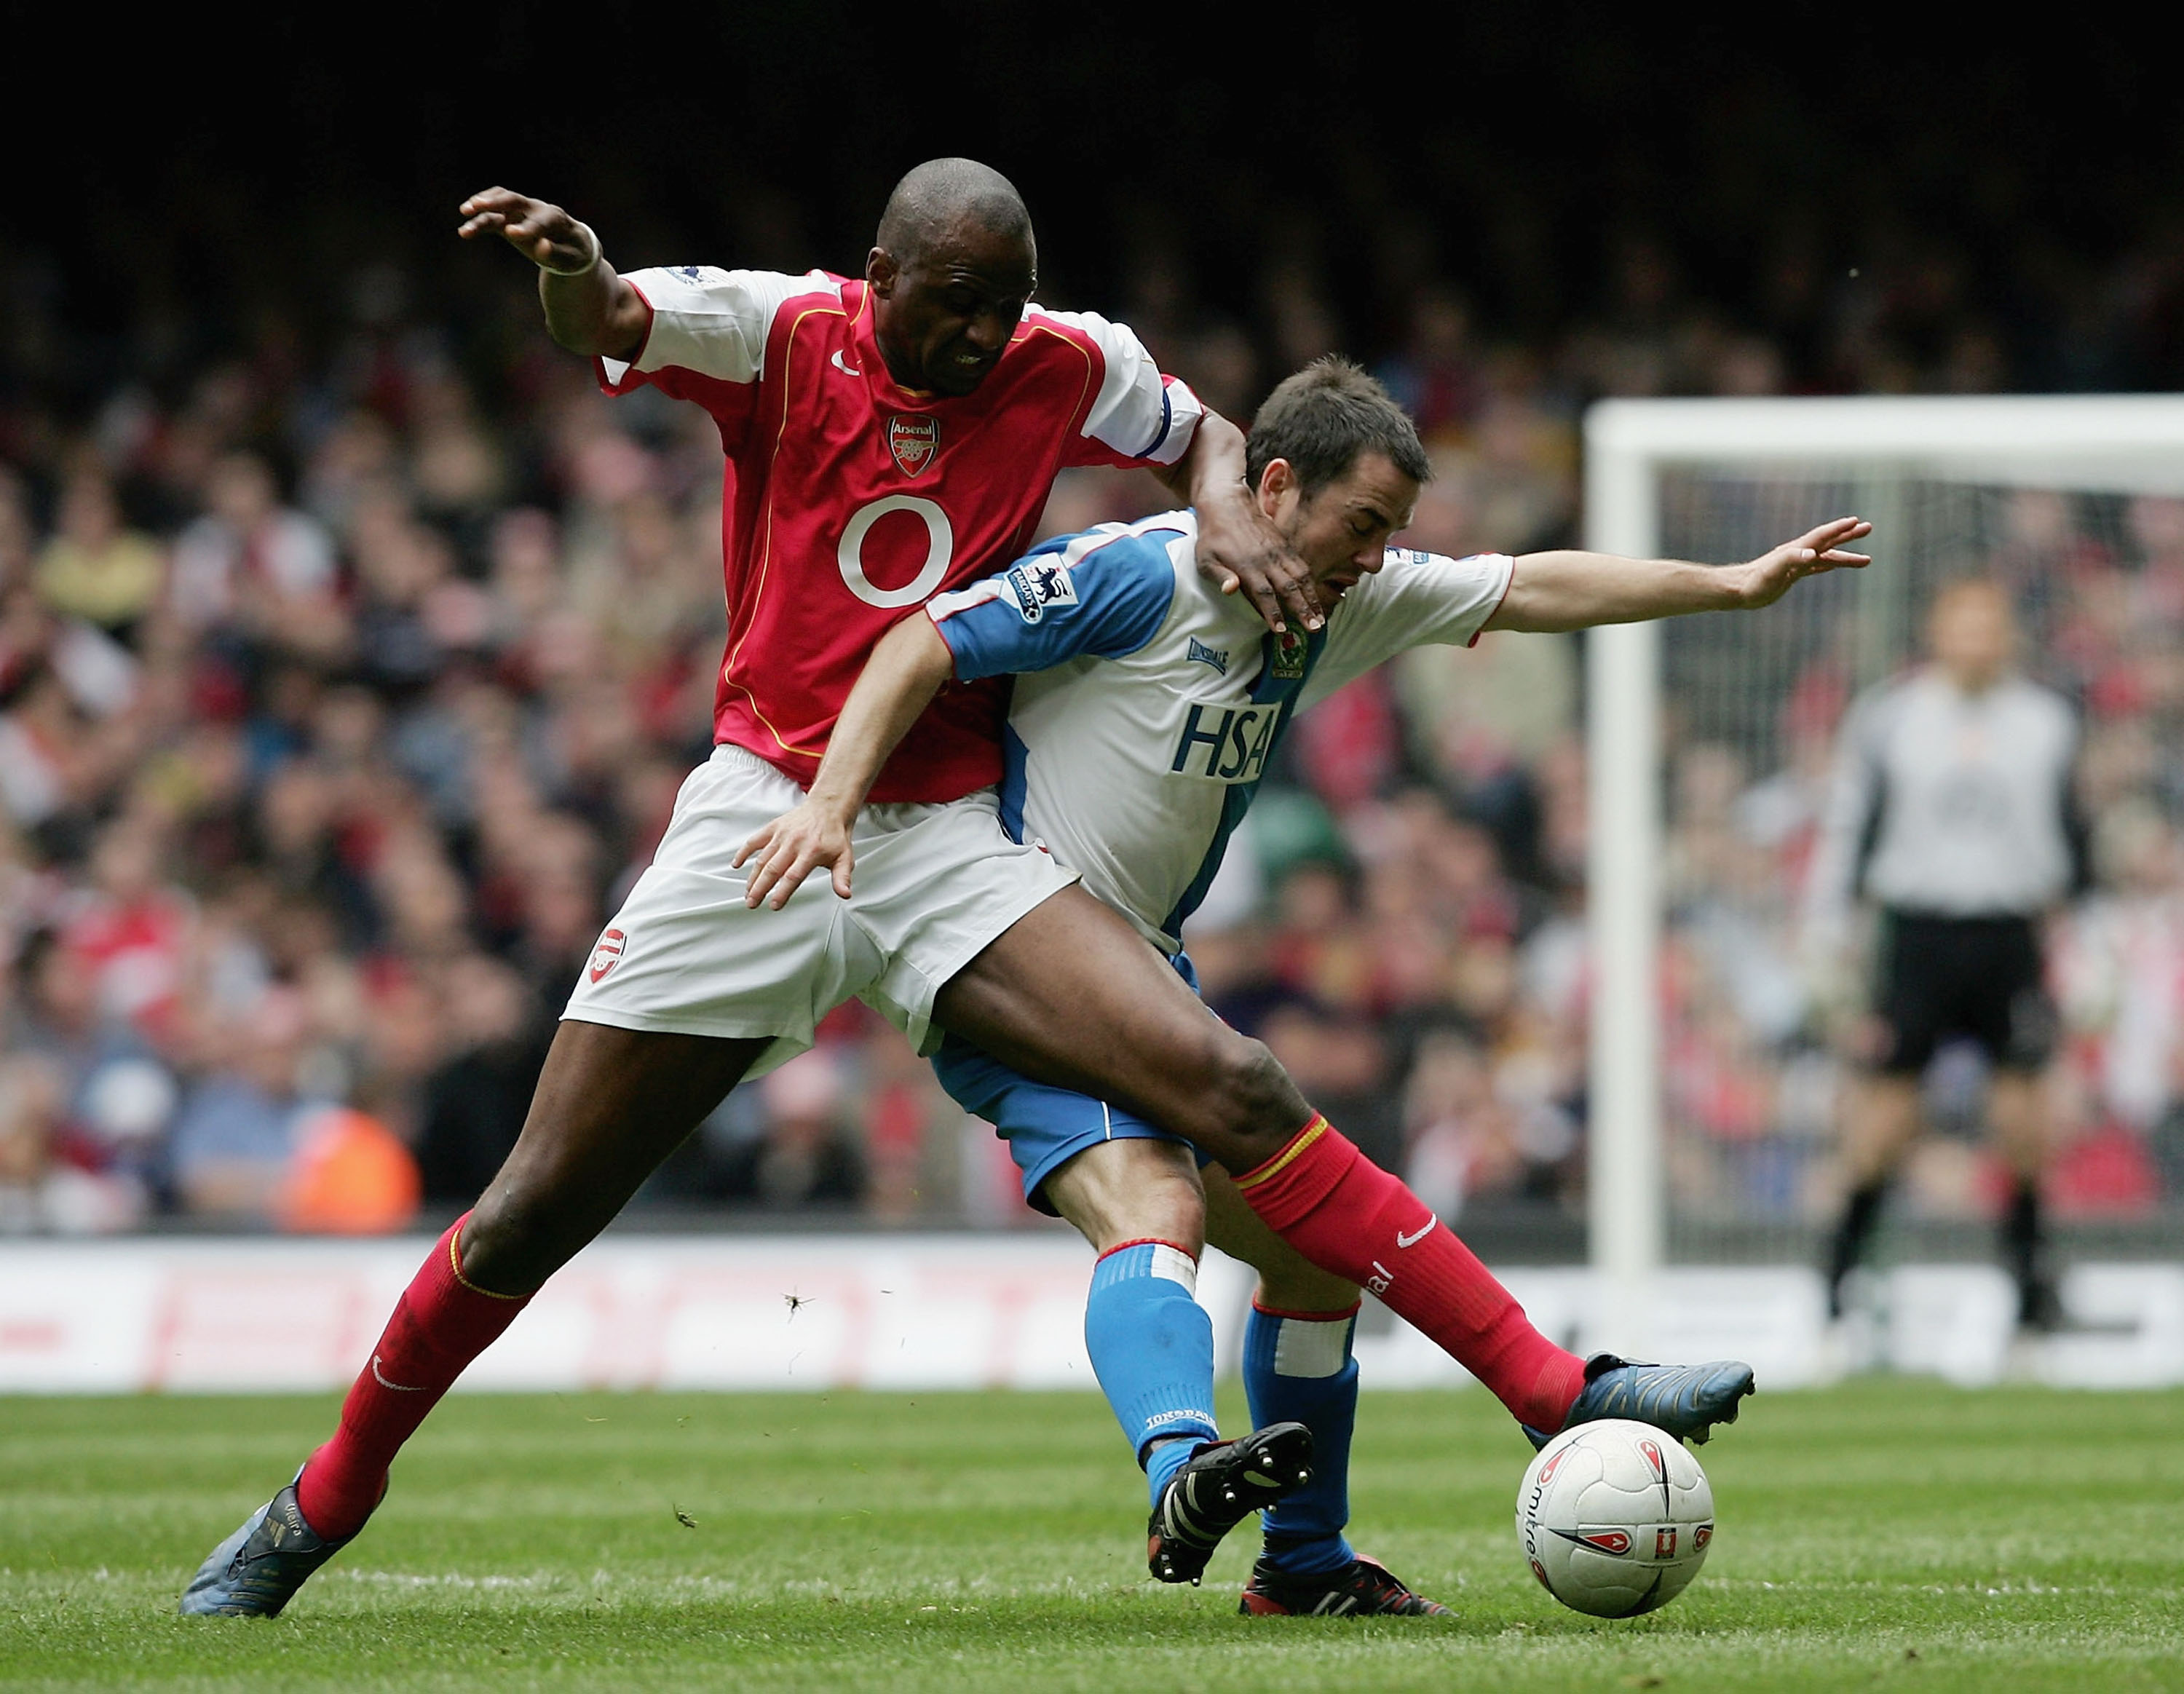 Arsenal's Nicolas Anelka evades a tackle from West Ham United's